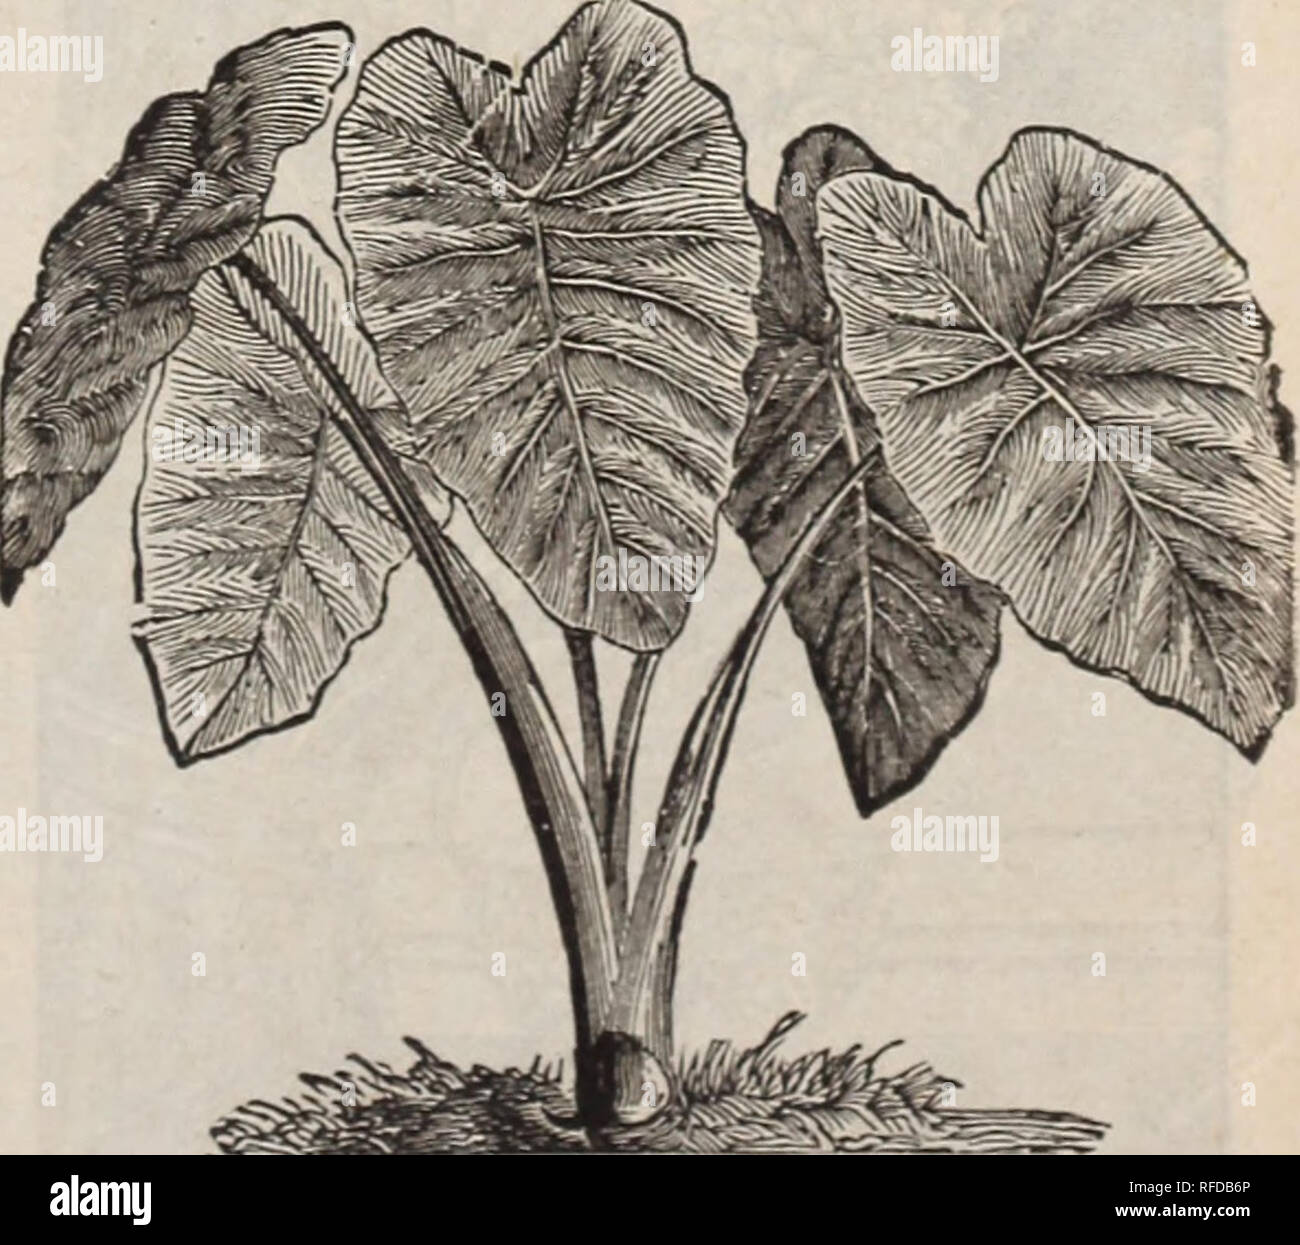 . [Catalogue]. Nursery stock Ohio Springfield Catalogs; Roses Catalogs; Plants, Ornamental Catalogs; Flowers Seeds Catalogs. THE BEAUTIFUL FANCY LEAVED CALADIUM Beautiful, orna- mental foliage plants, especially valuable for window boxes, vases or specimen plants. Most of the varieties succeed nicely if planted in partially shaded bor- der in light, rich soil. Price, large bulbs, 25c each.. FIVE..... DISTINCT VARIETIES FOR $1.00 CALADIUM ESCULENTUM Commonly known as Elephant's Ear. Very effective and suitable for either a single plant on the lawn, masses in beds or margins of water. Its very d Stock Photo